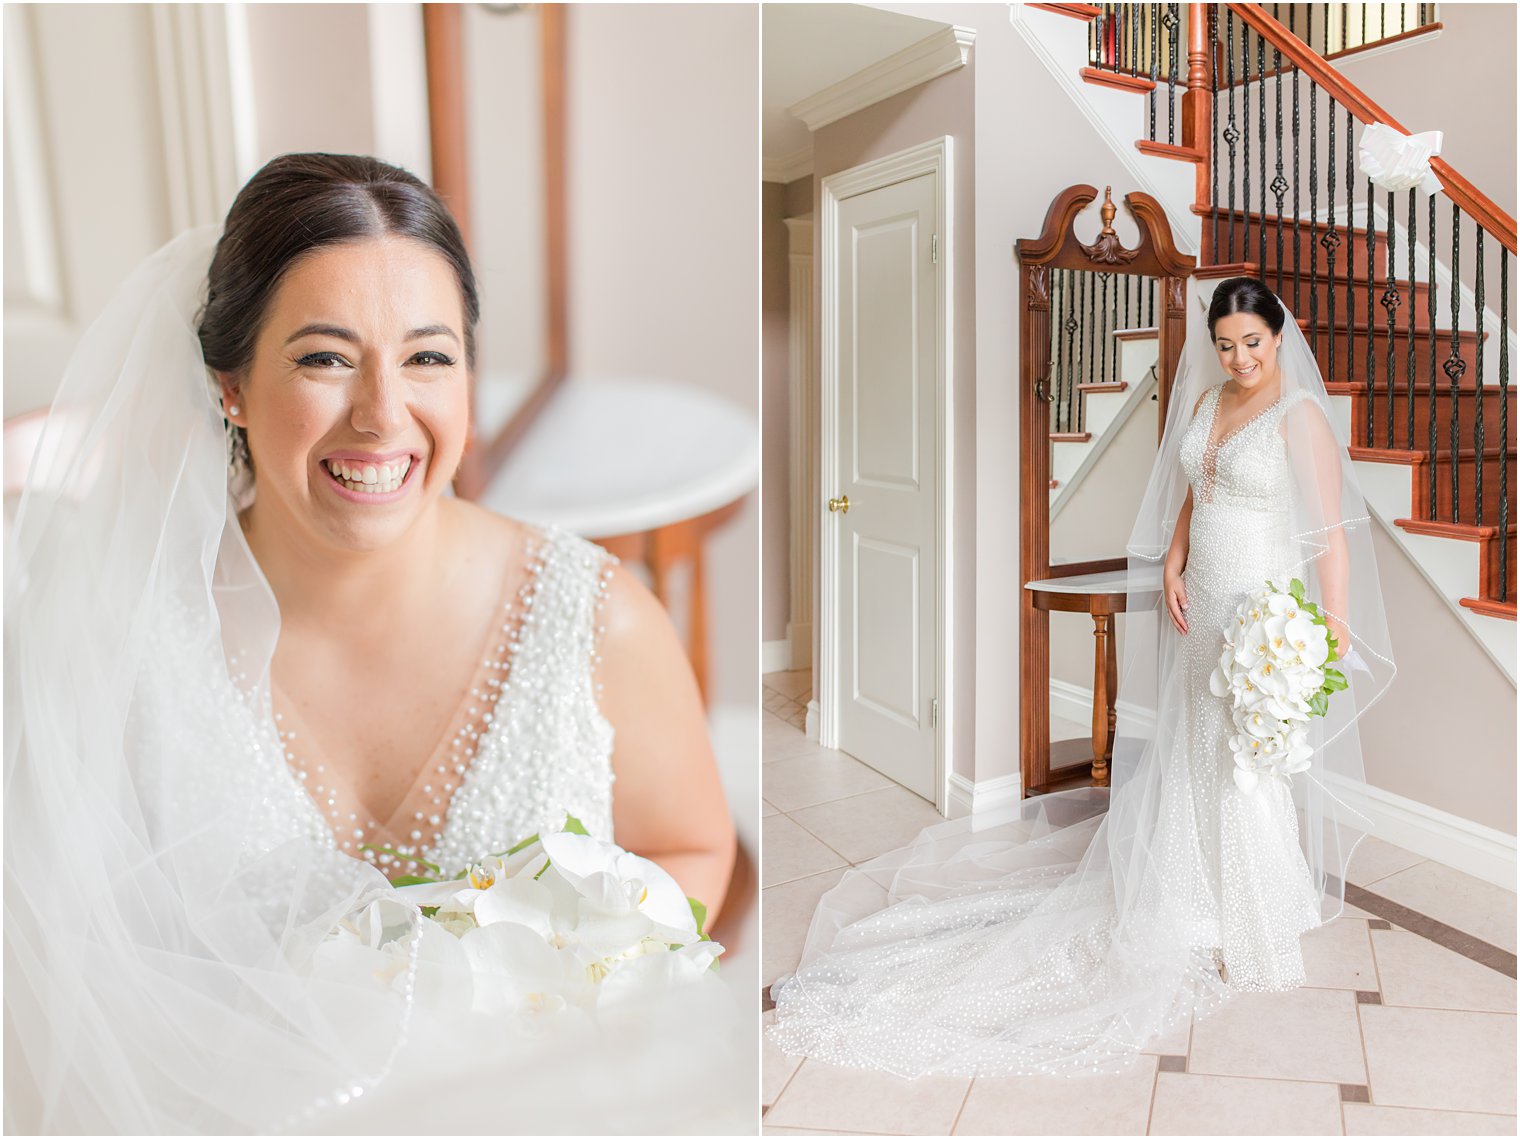 bride holds bouquet of white flowers by staircase